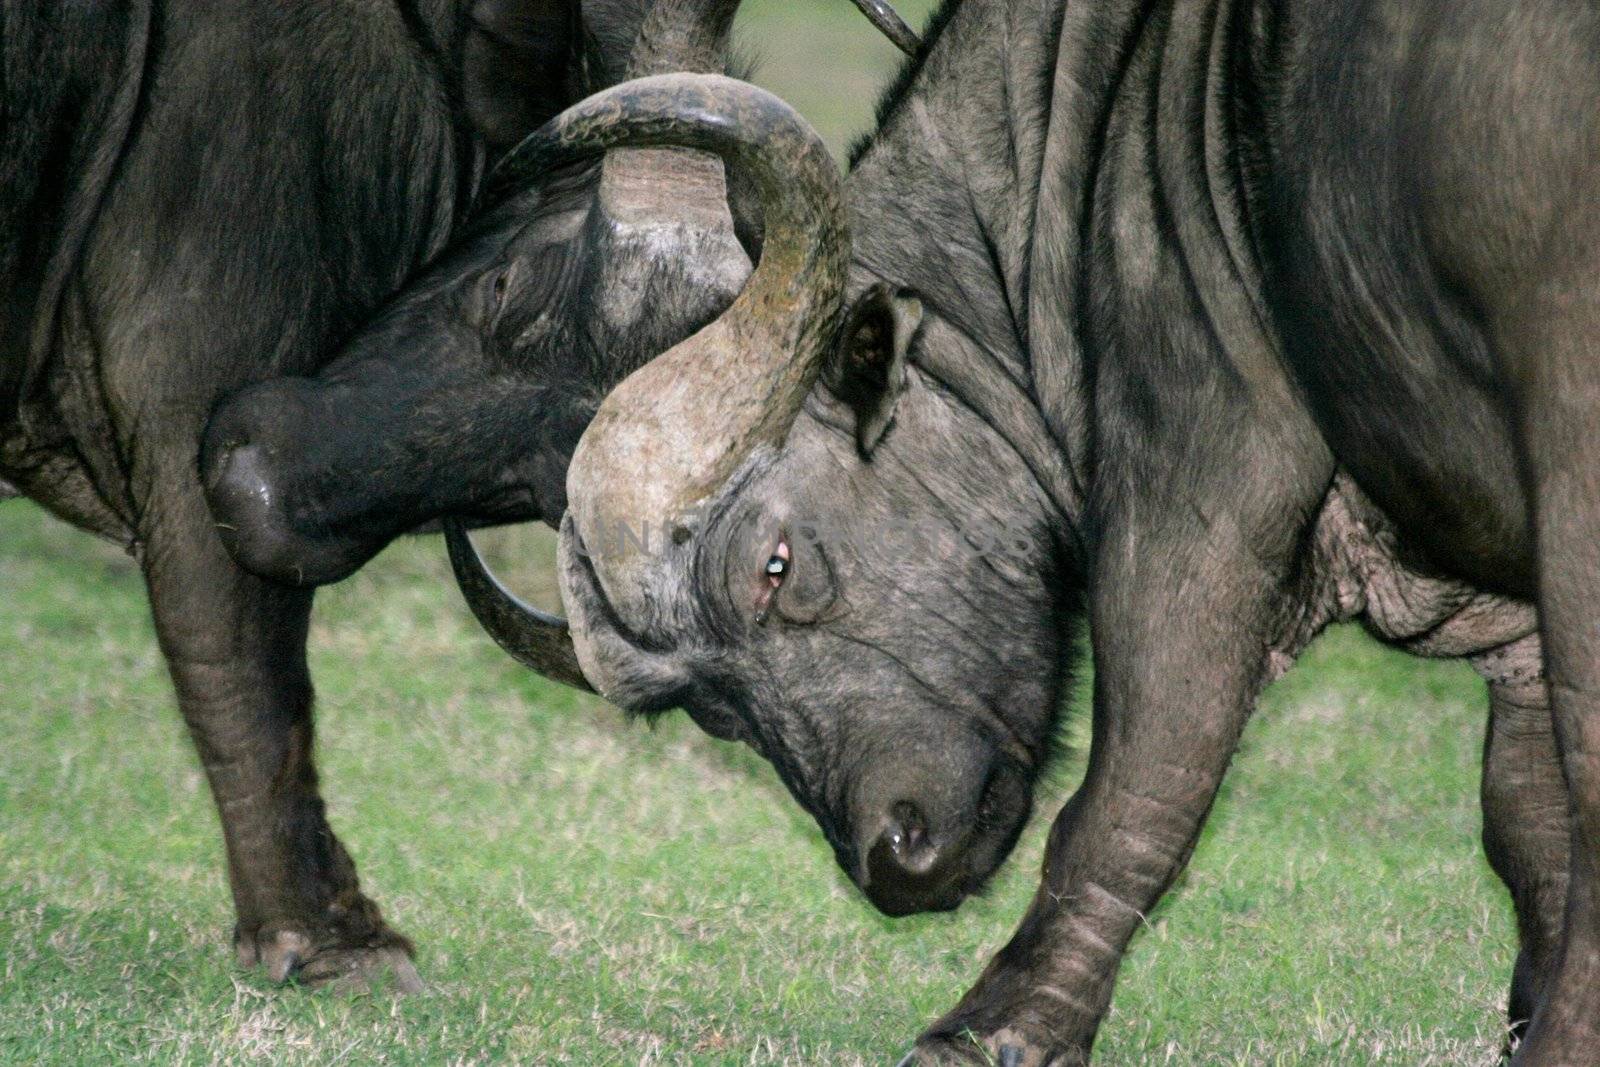 Two buffaloes with large curved horns sparring